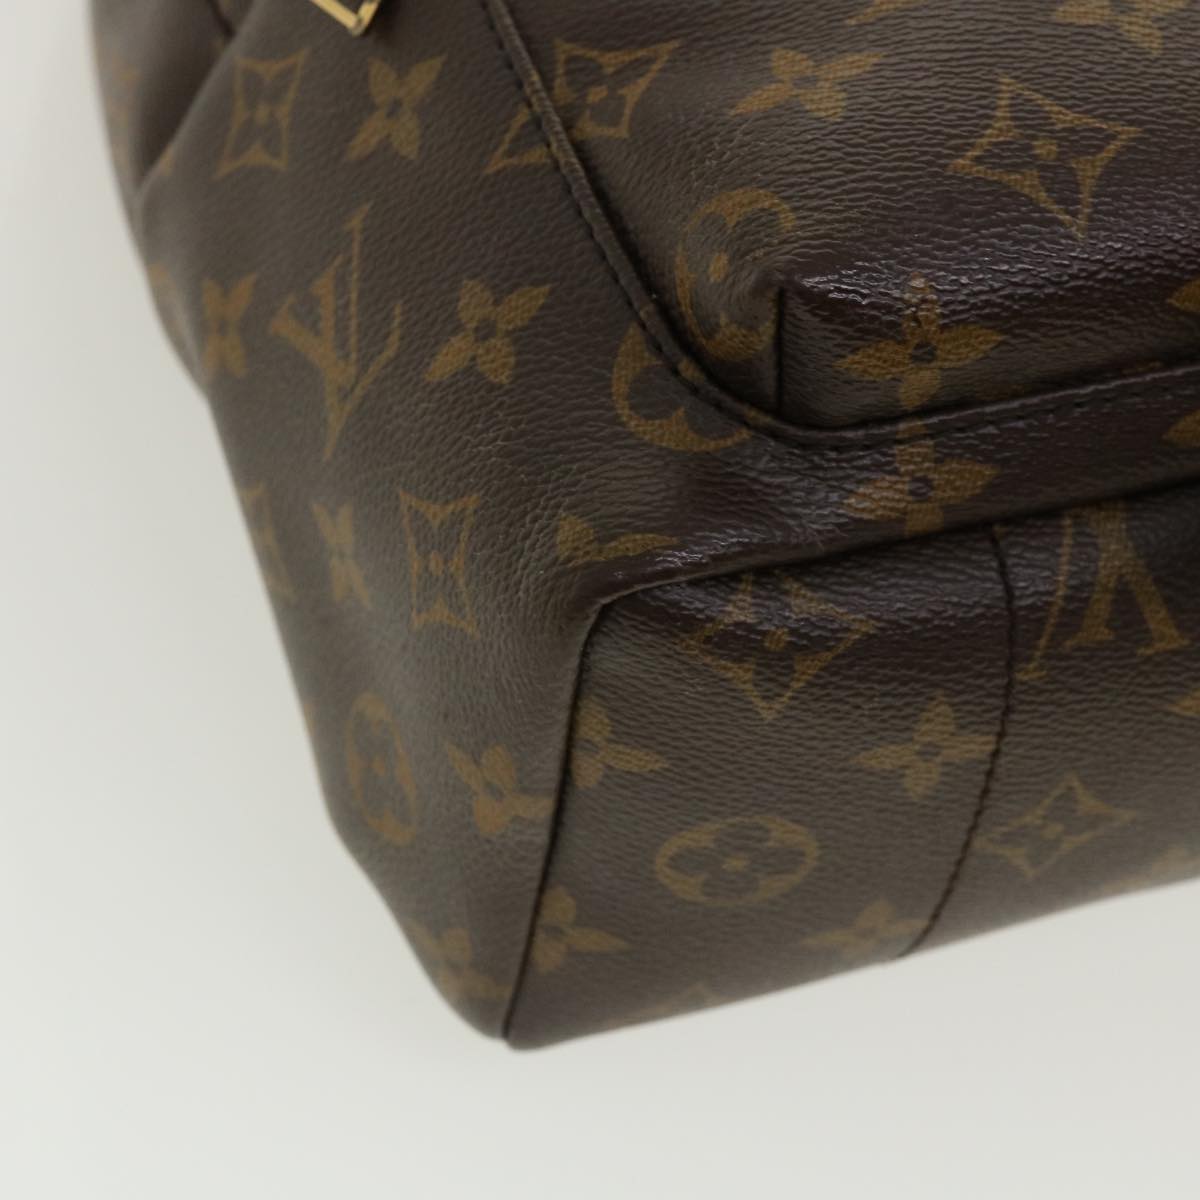 LOUIS VUITTON Monogram Palm Springs PM Backpack M41560 LV Auth bs2081